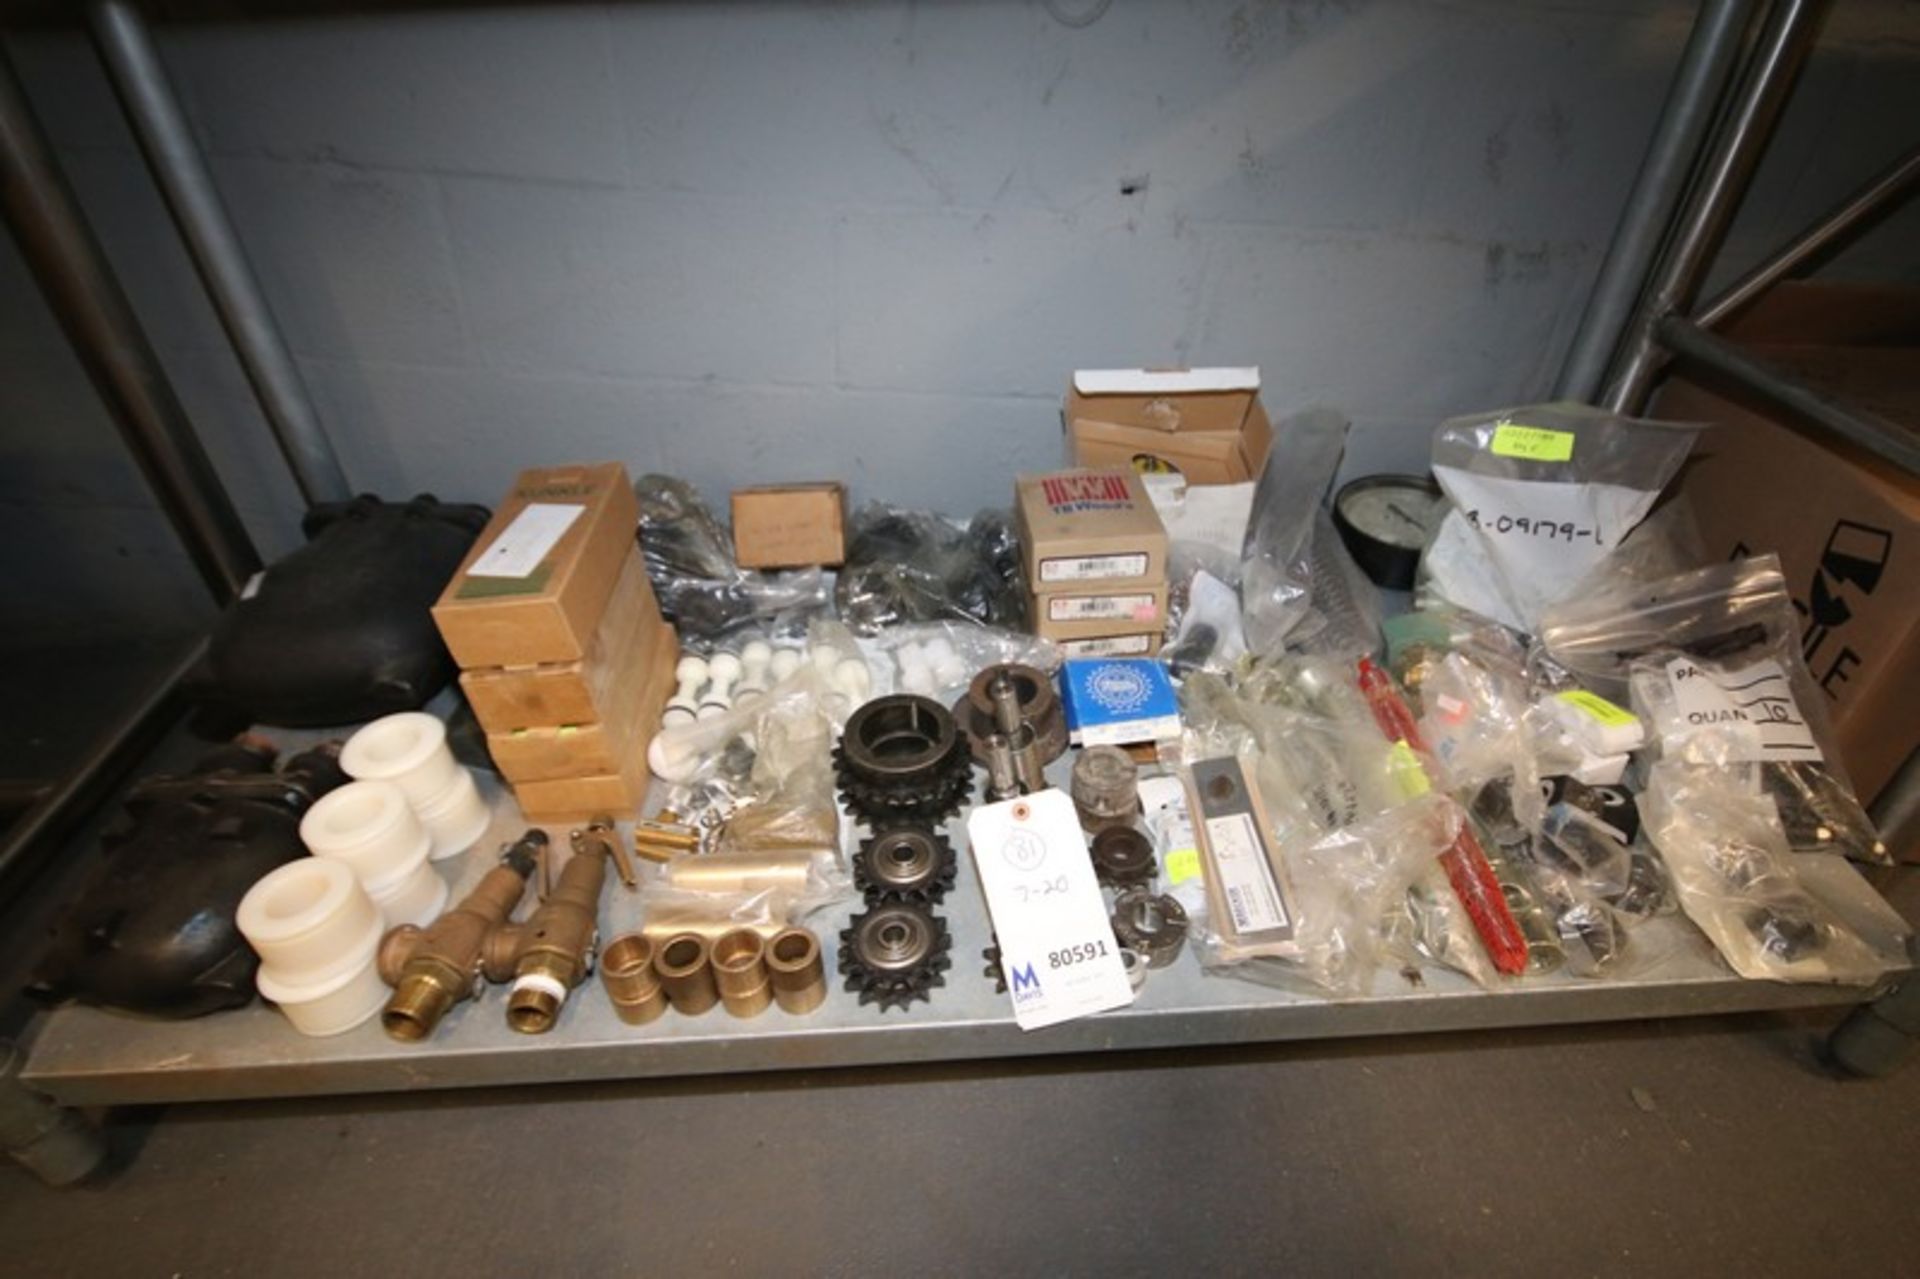 Lot of Assorted Parts Includes Spirax Steam Traps, Kunkle Valves, Sprockets, Woods Drive Parts,